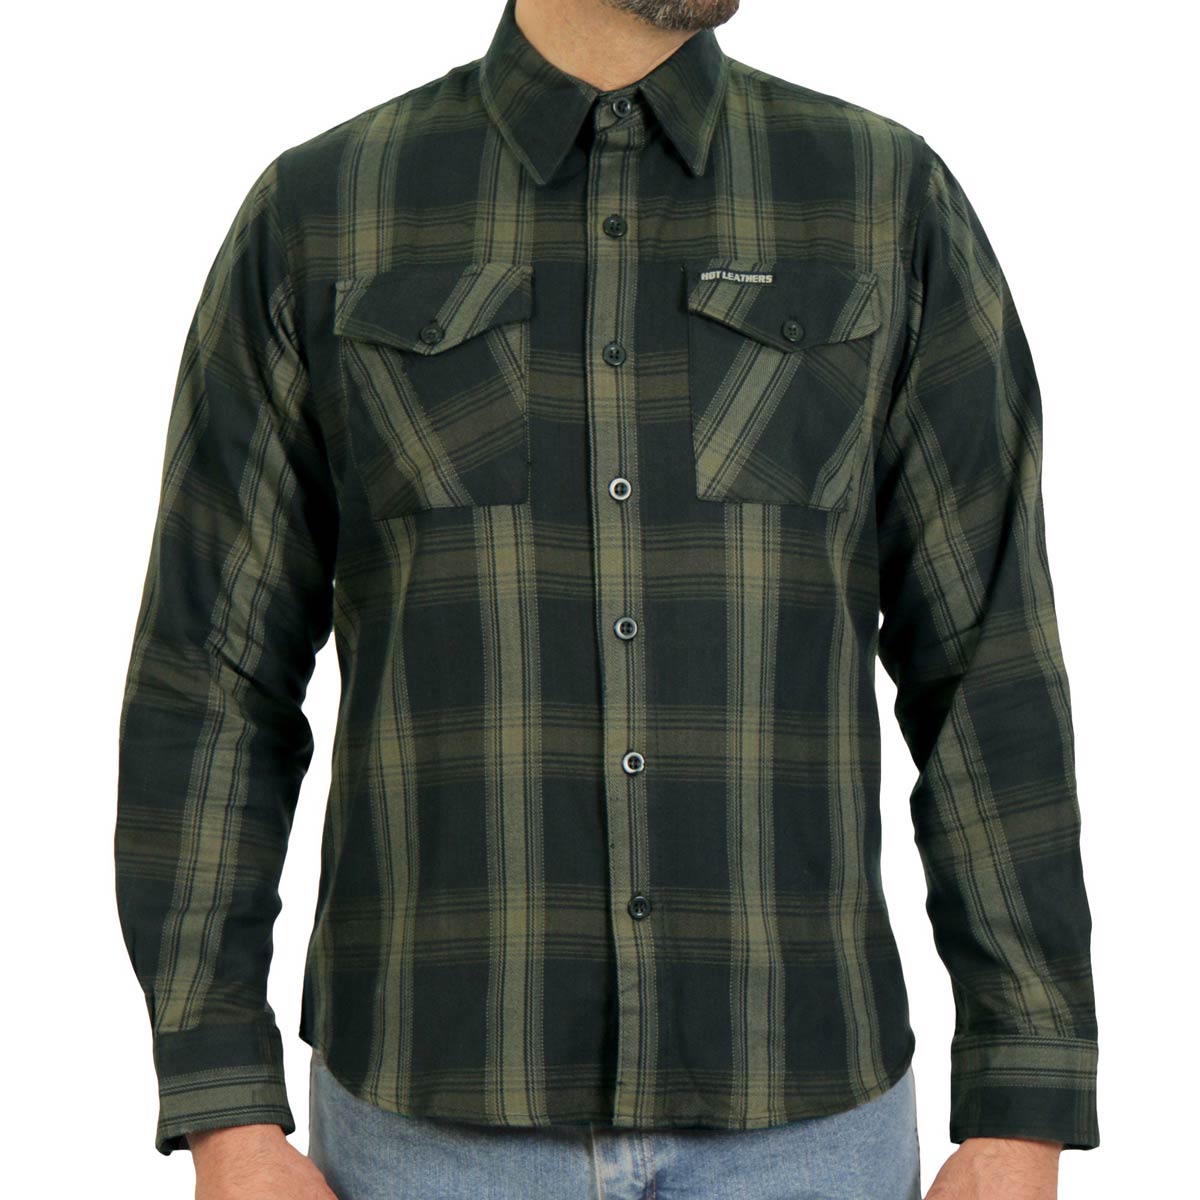 Hot Leathers FLM2018 Men's Black and Green Long Sleeve Flannel Shirt